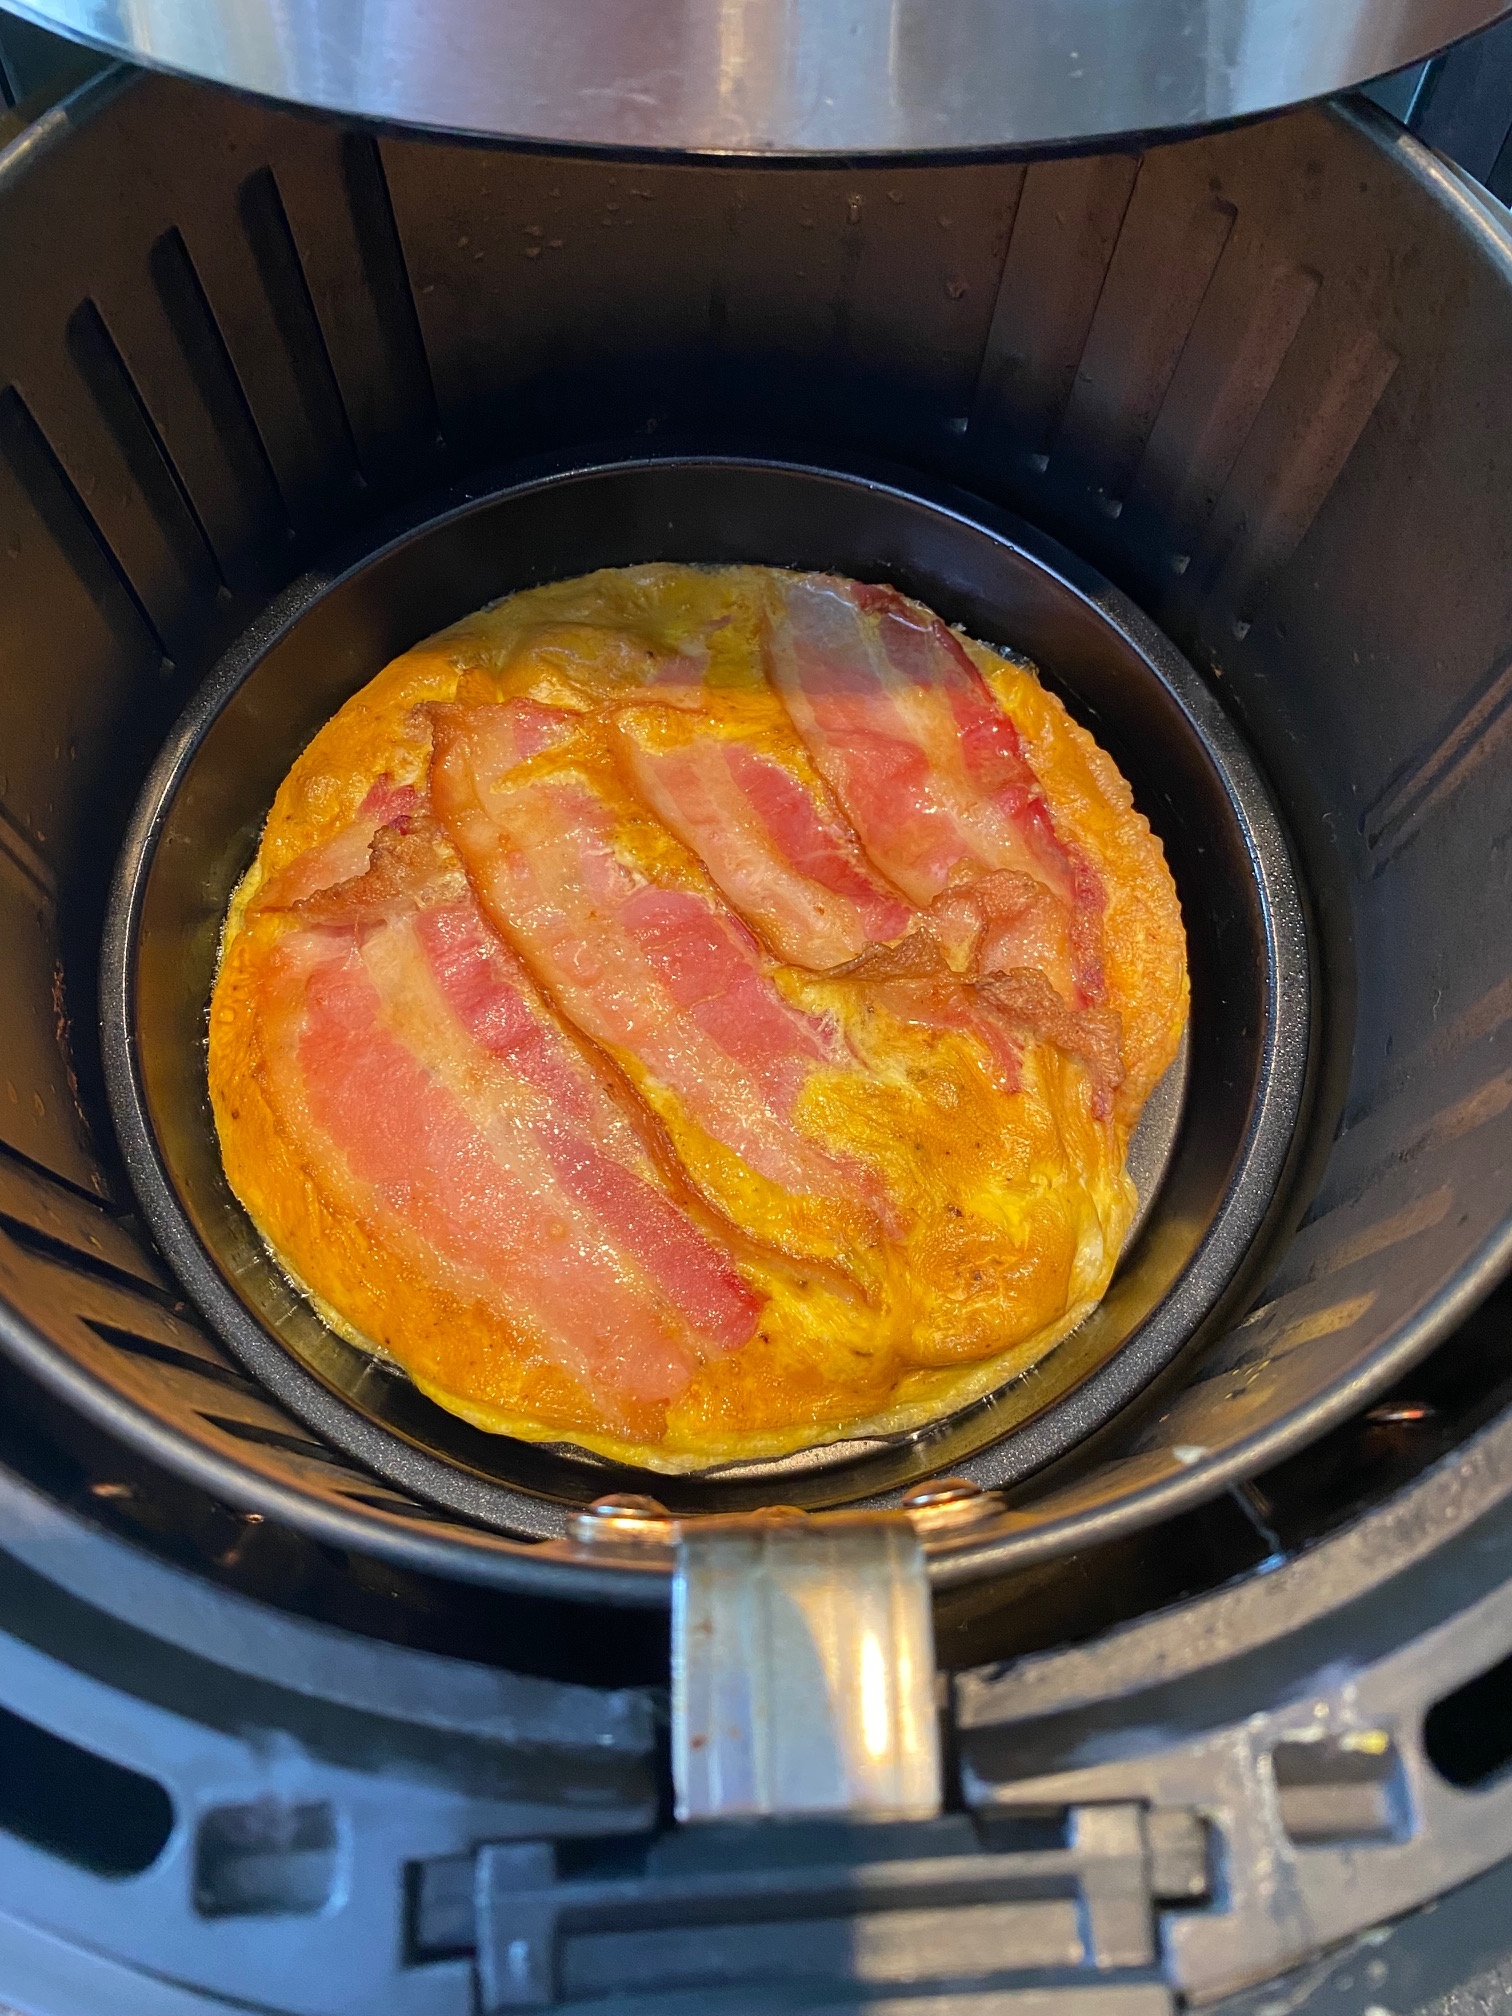 https://www.melaniecooks.com/wp-content/uploads/2022/05/Air-Fryer-Bacon-And-Eggs-2-1-rotated.jpg